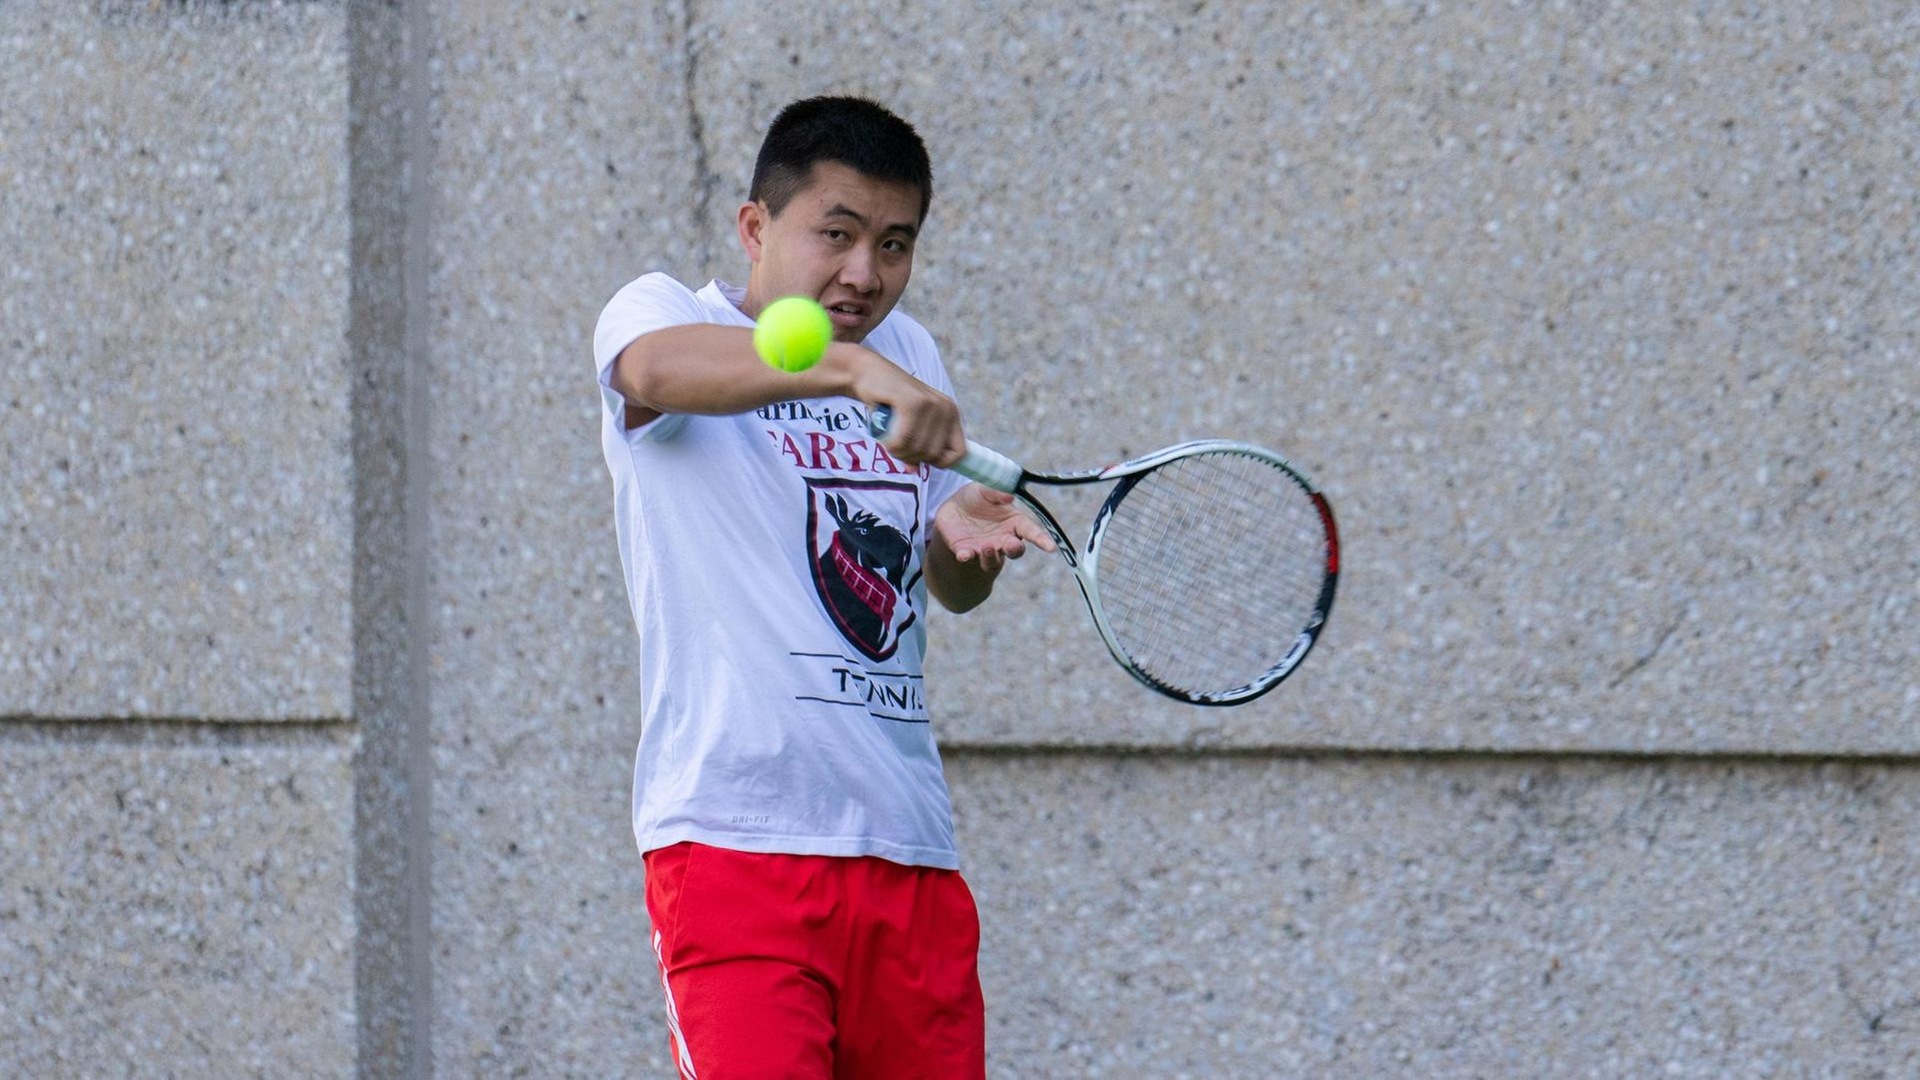 men's tennis player wearing a white shirt and red shorts prepares to hit a ball